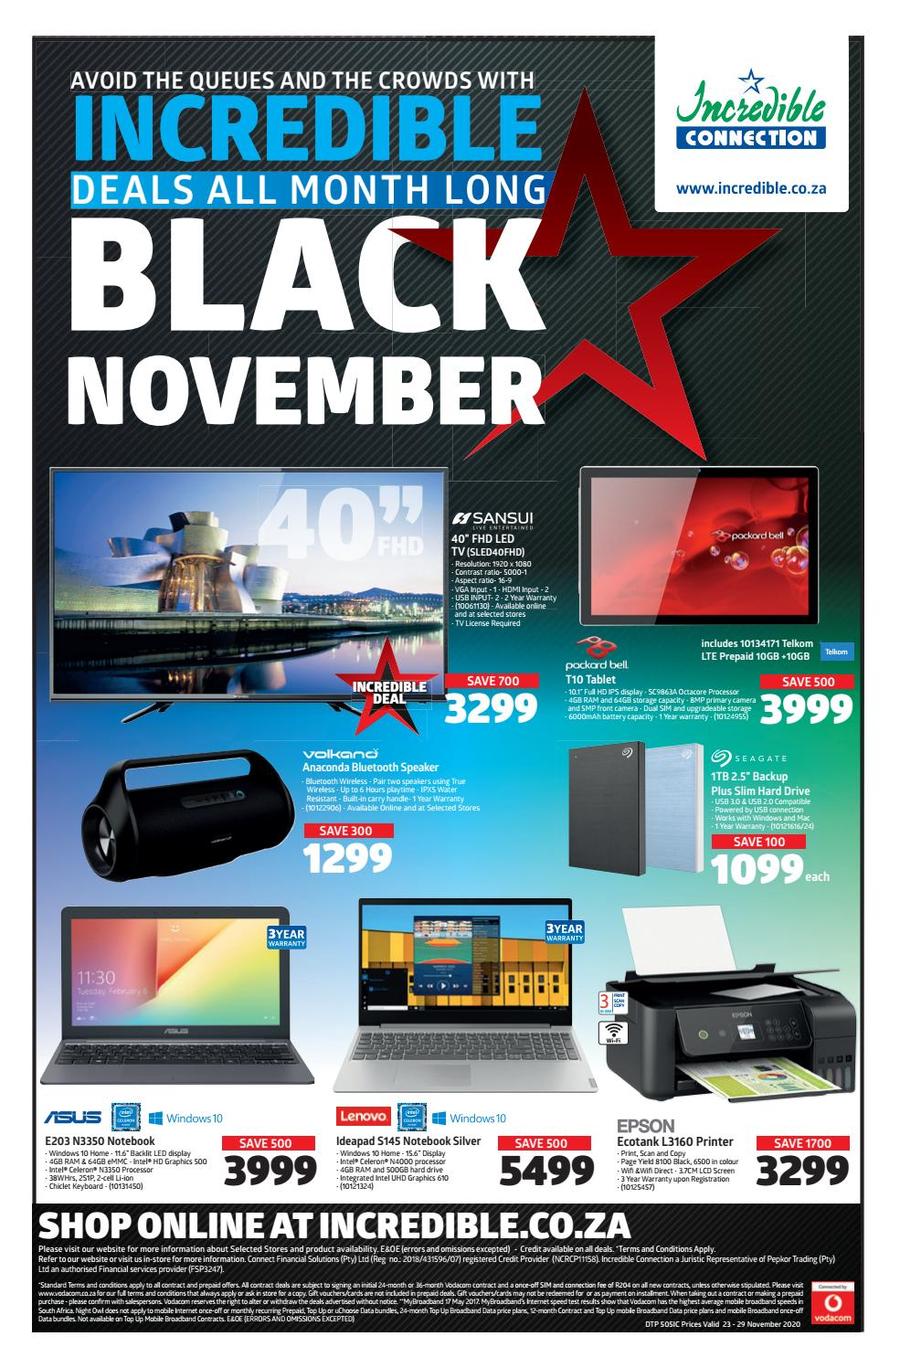 Incredible Connection Black Friday Deals 2021 - Will There Ve More Black Friday Deals